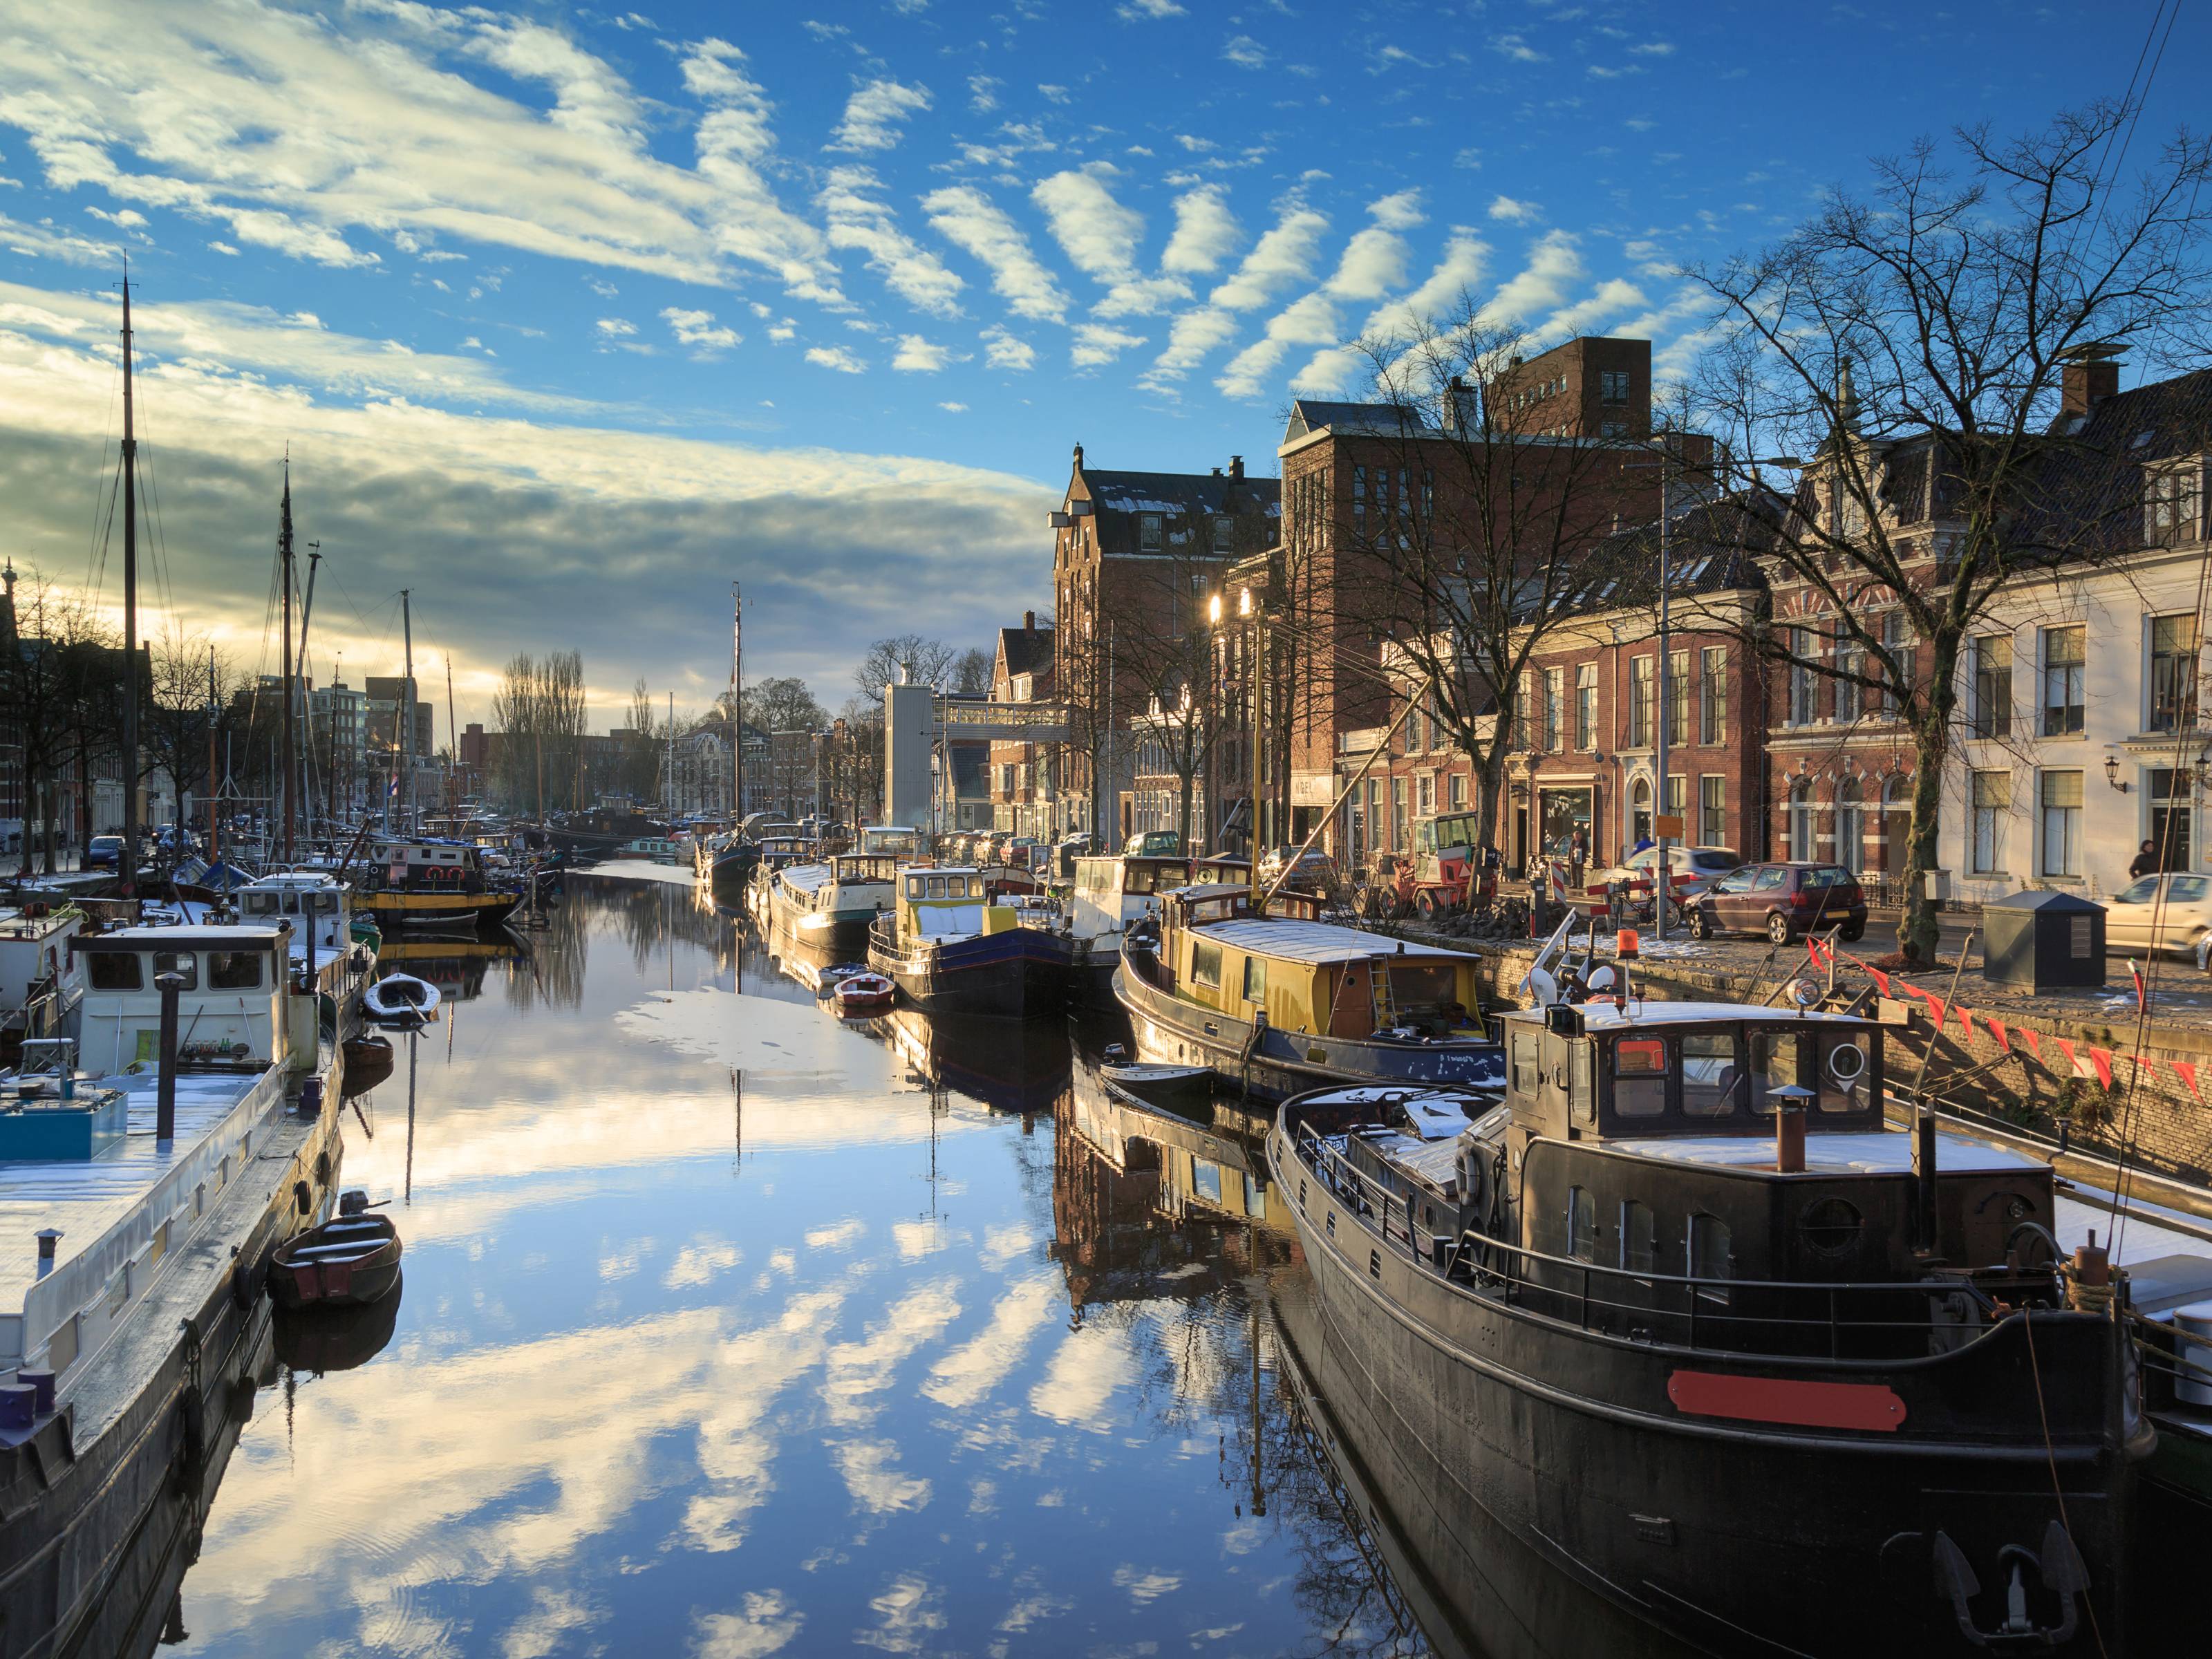 View of one of Groningen's canals with boats and trees